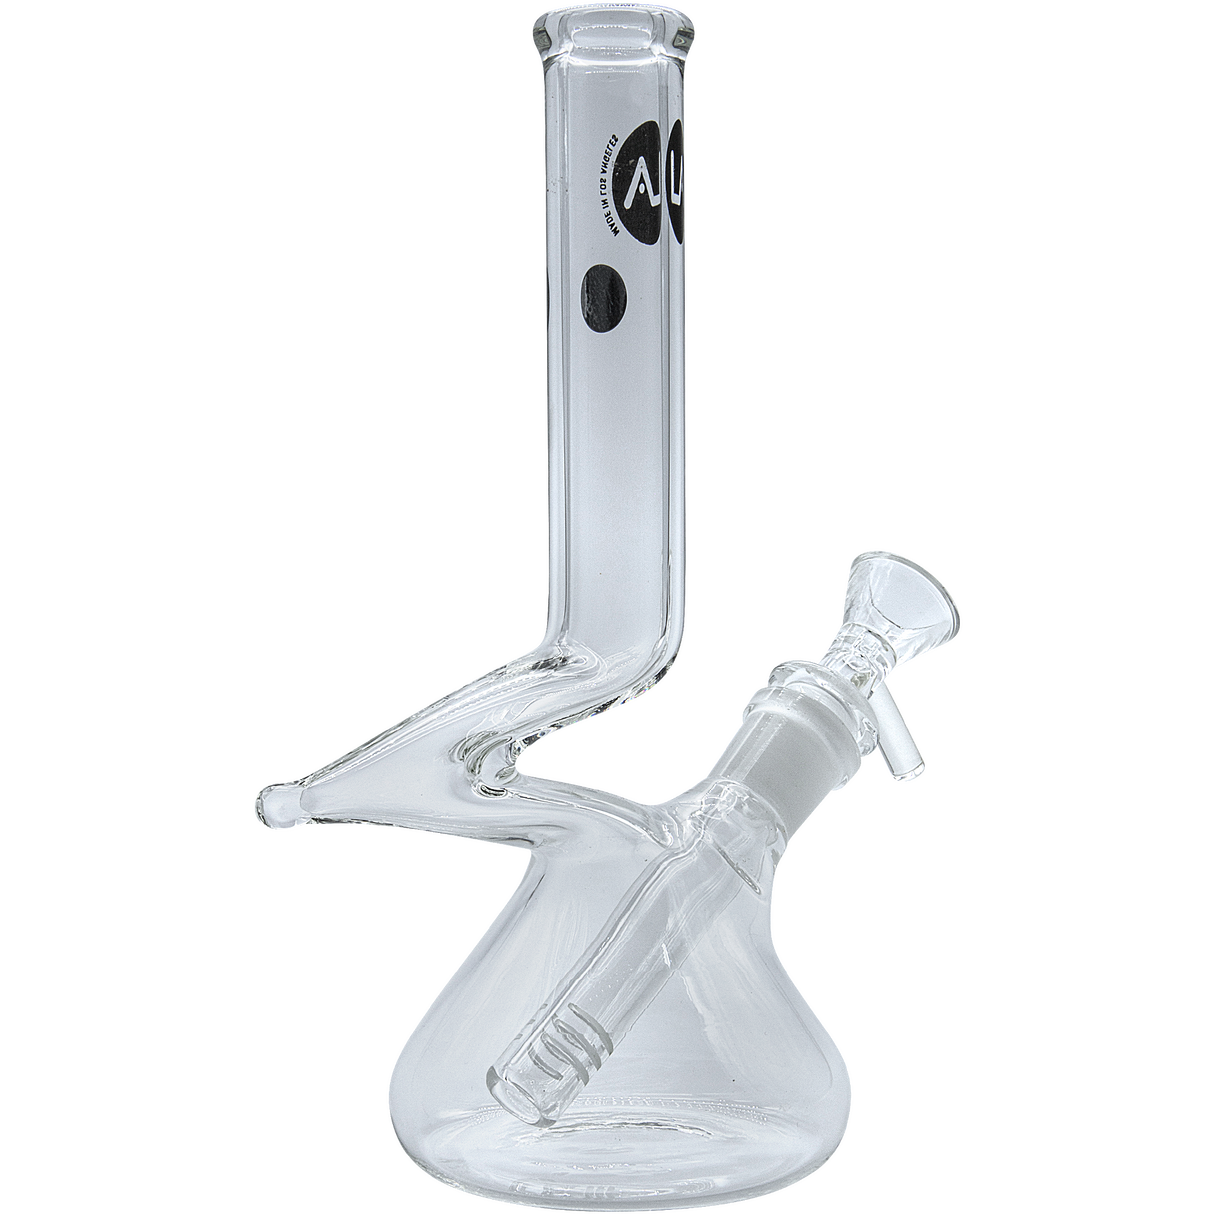 LA Pipes "The Zag" Beaker Zong Style Bong, 8" Height, Clear Borosilicate Glass, Side View